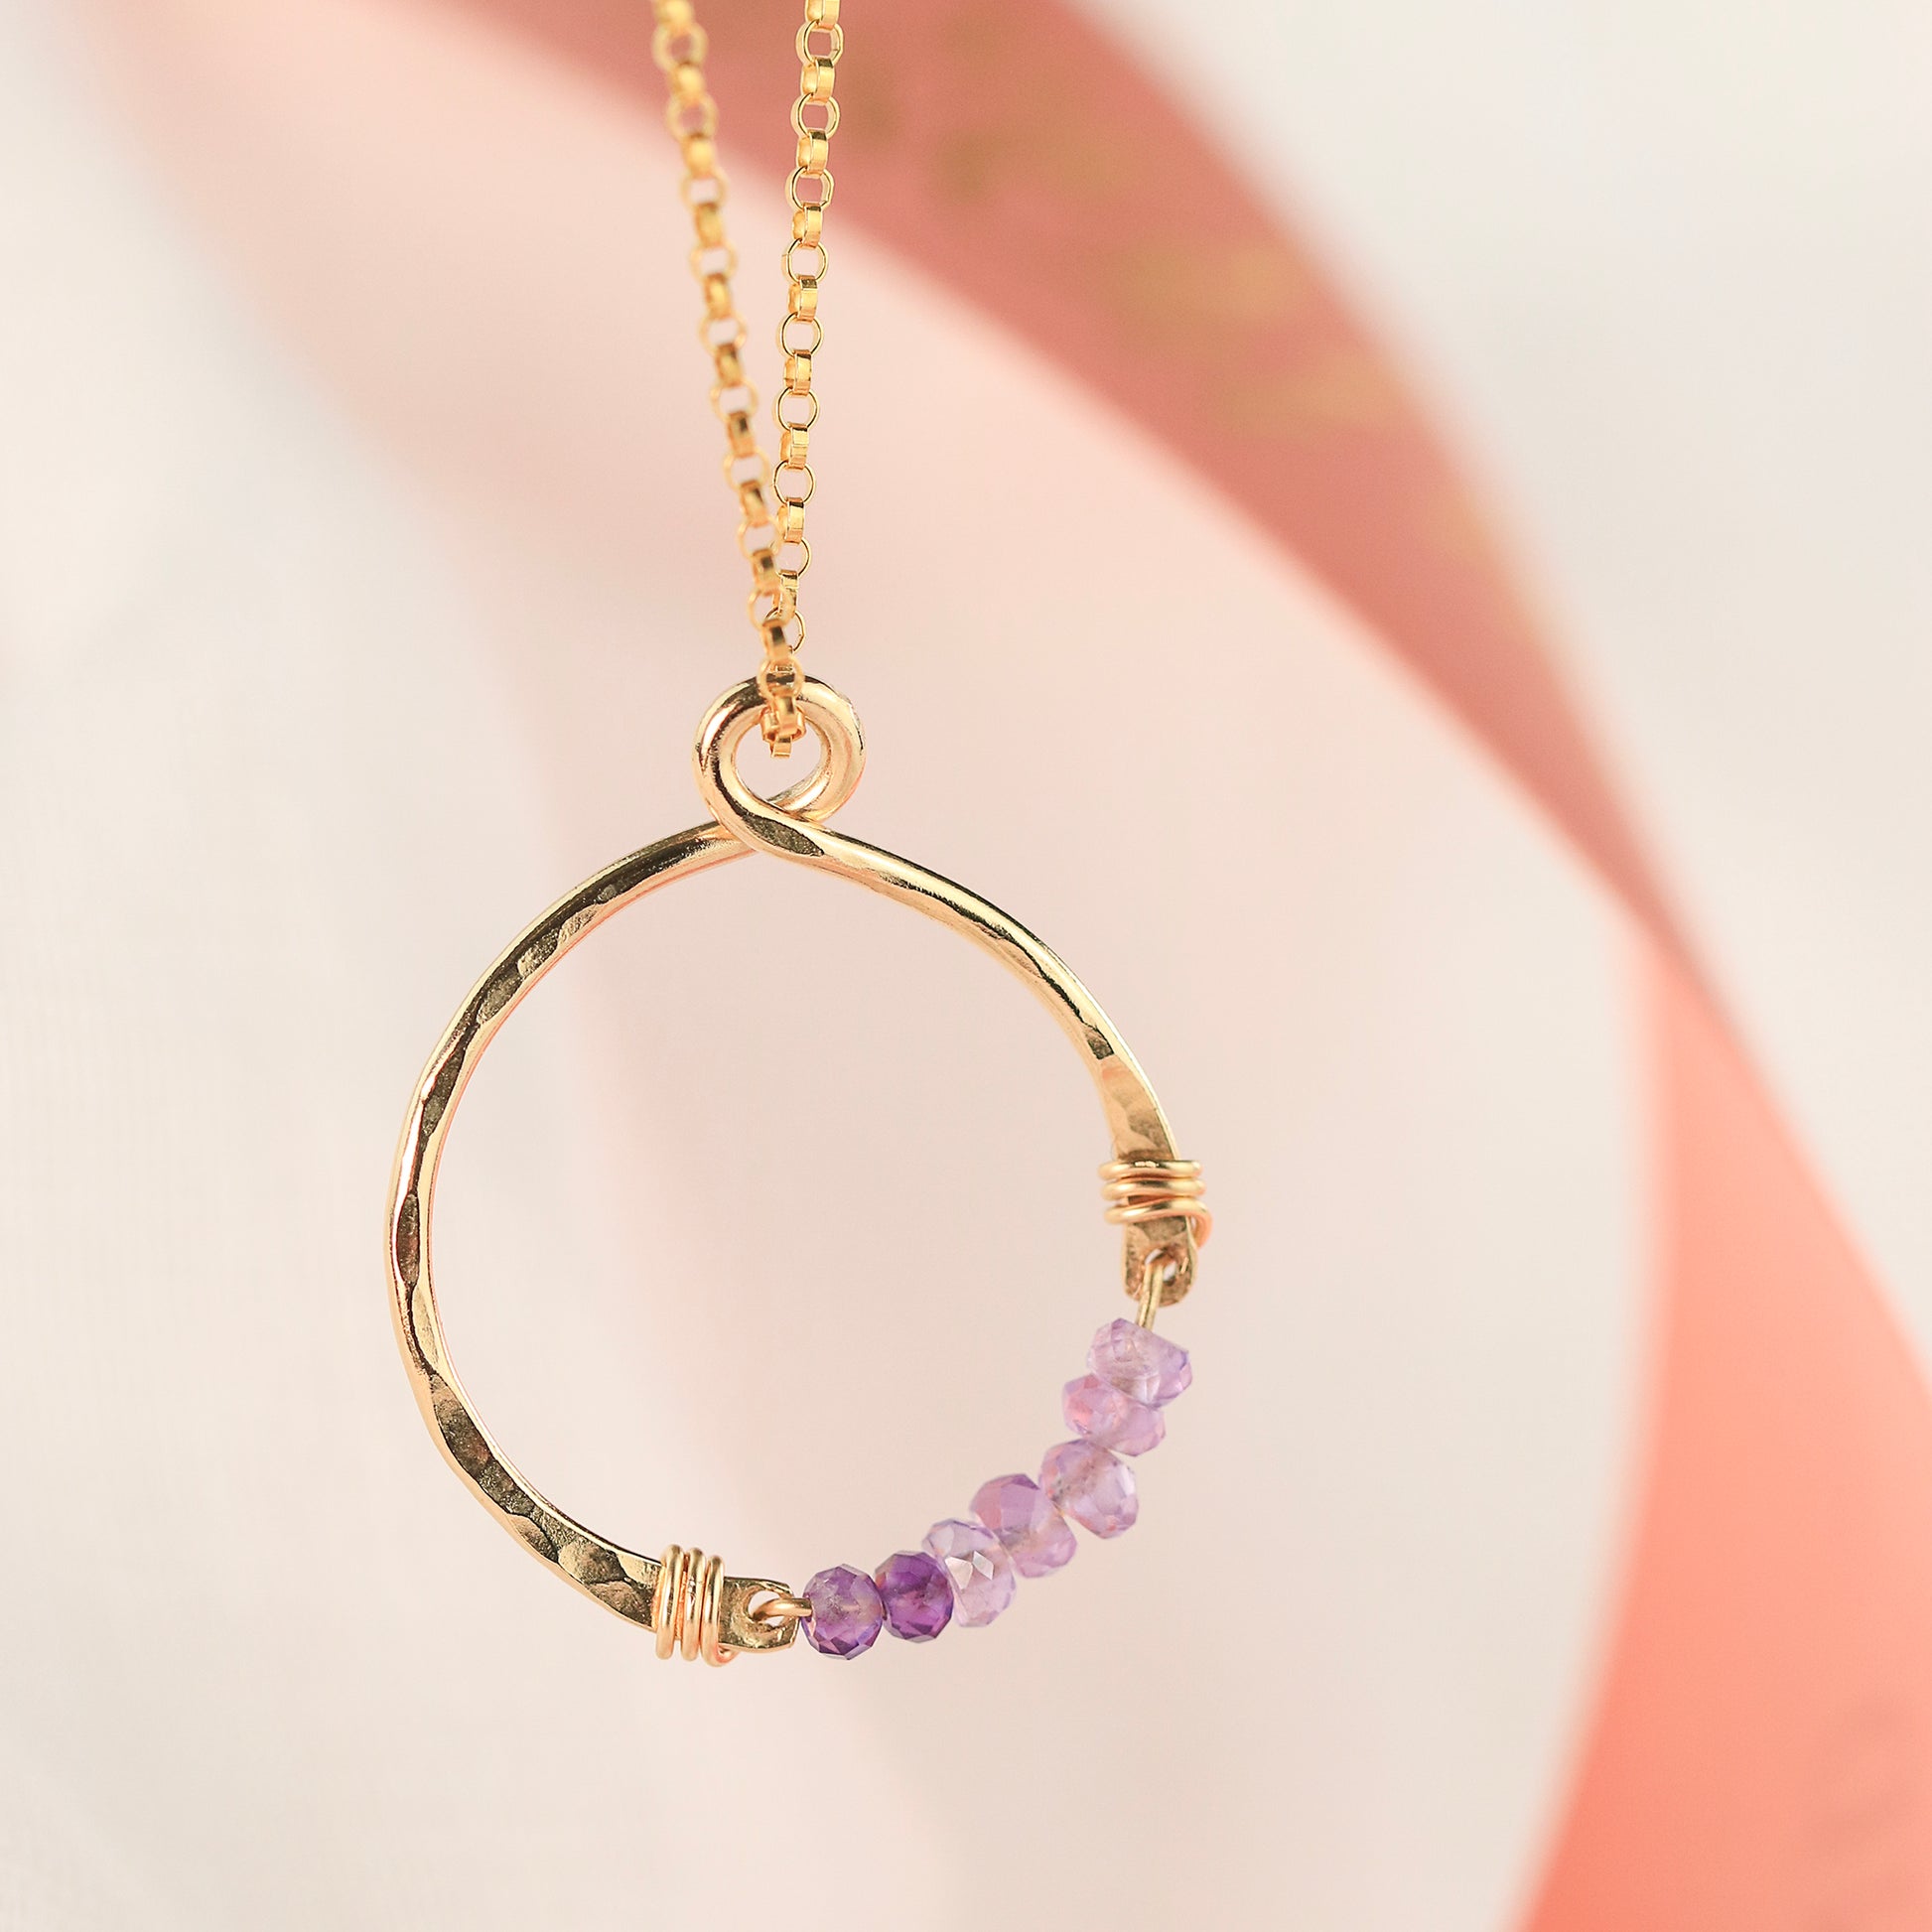 Gift for Niece - Infinity Birthstone Necklace - Silver & Gold